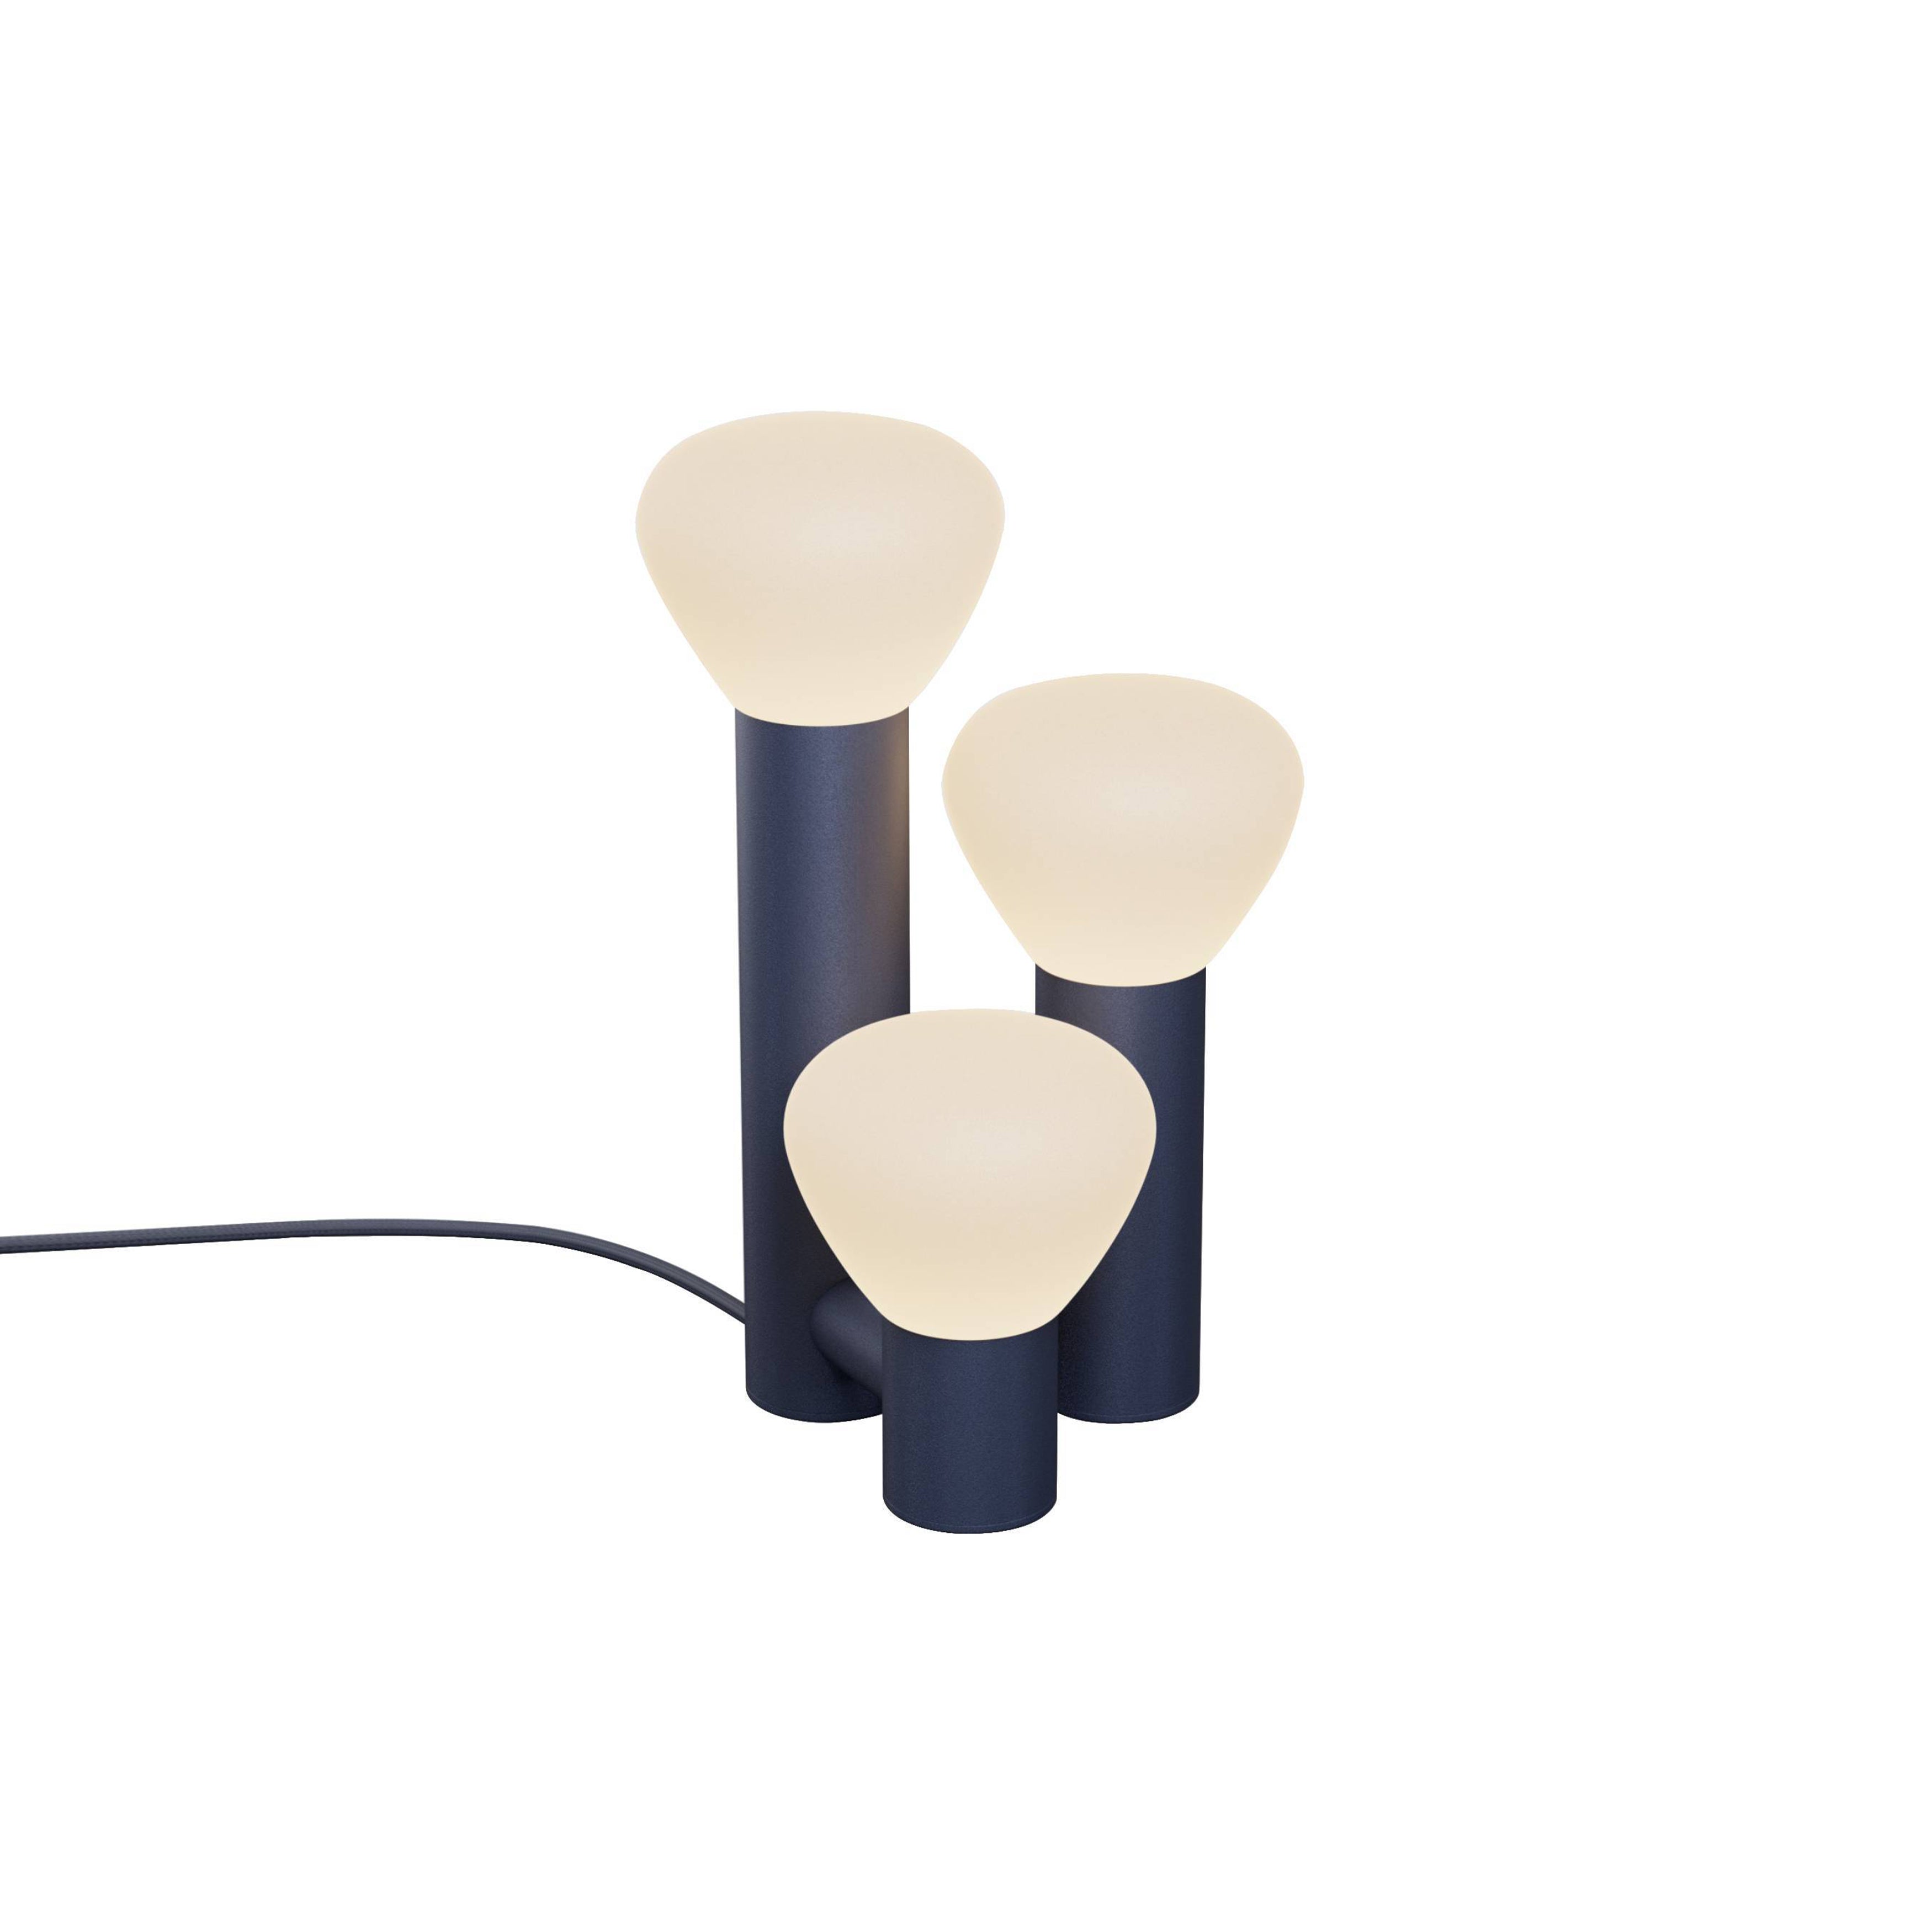 Parc 06 Table Lamp: Handswitch + Midnight Blue + Midnight Blue